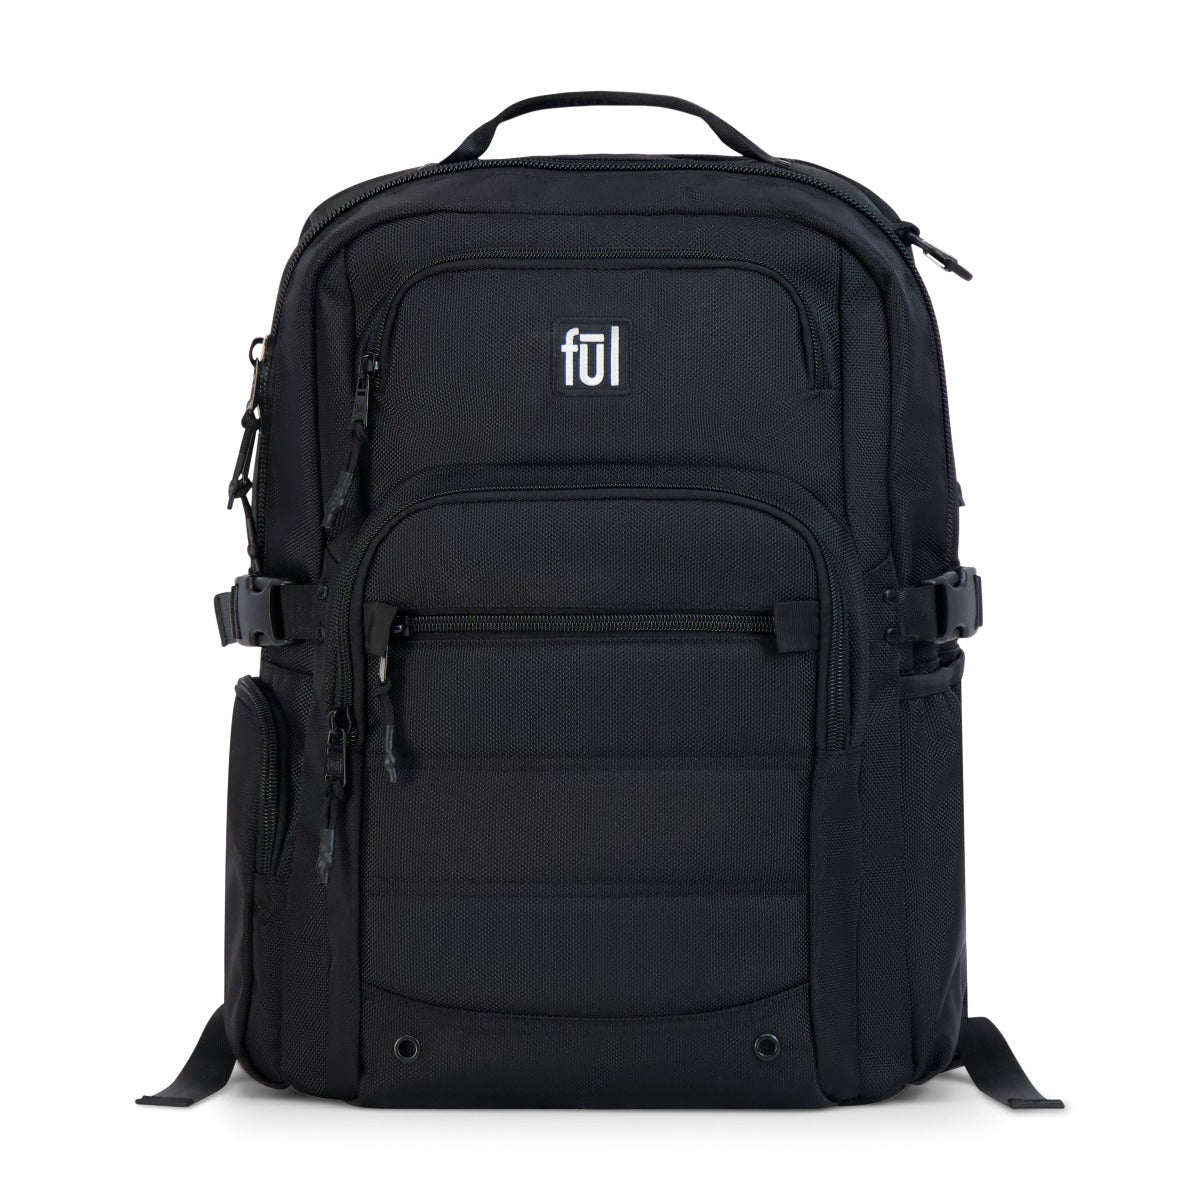 Backpack Black Collection Tactics Division